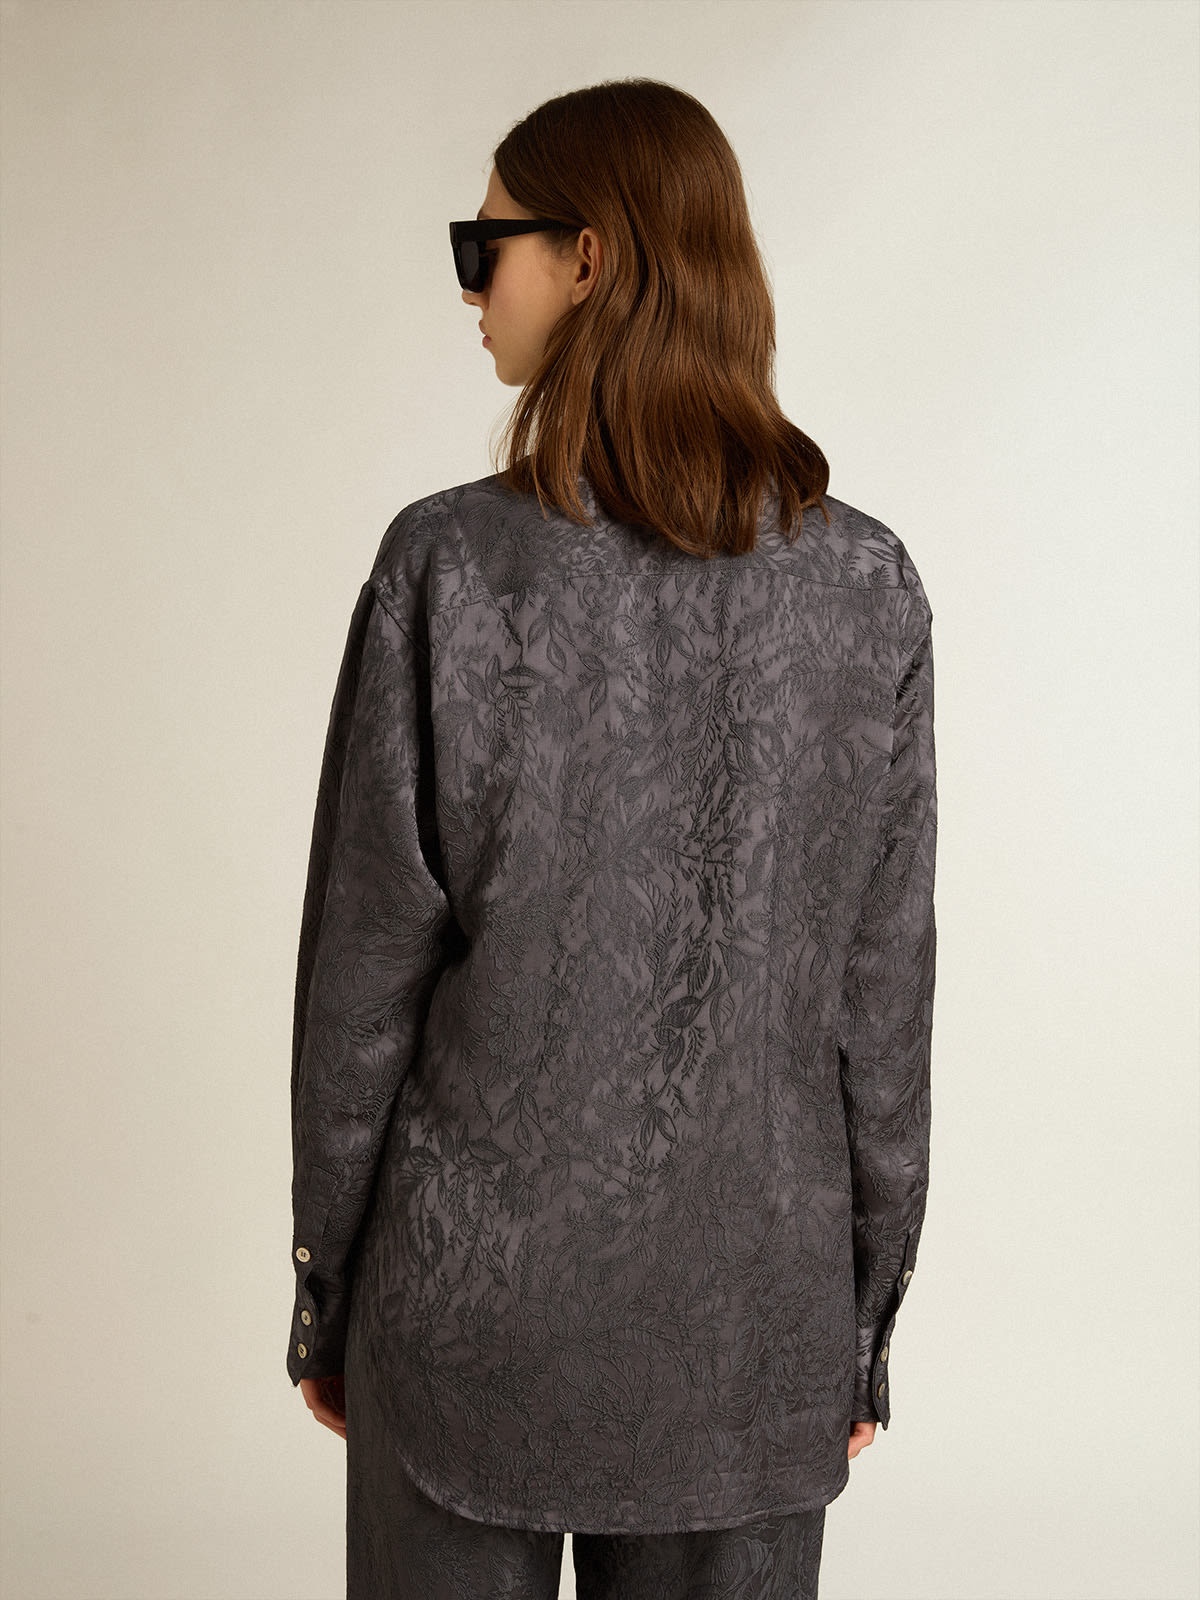 Jacquard shirt with all-over toile de jouy pattern - 4